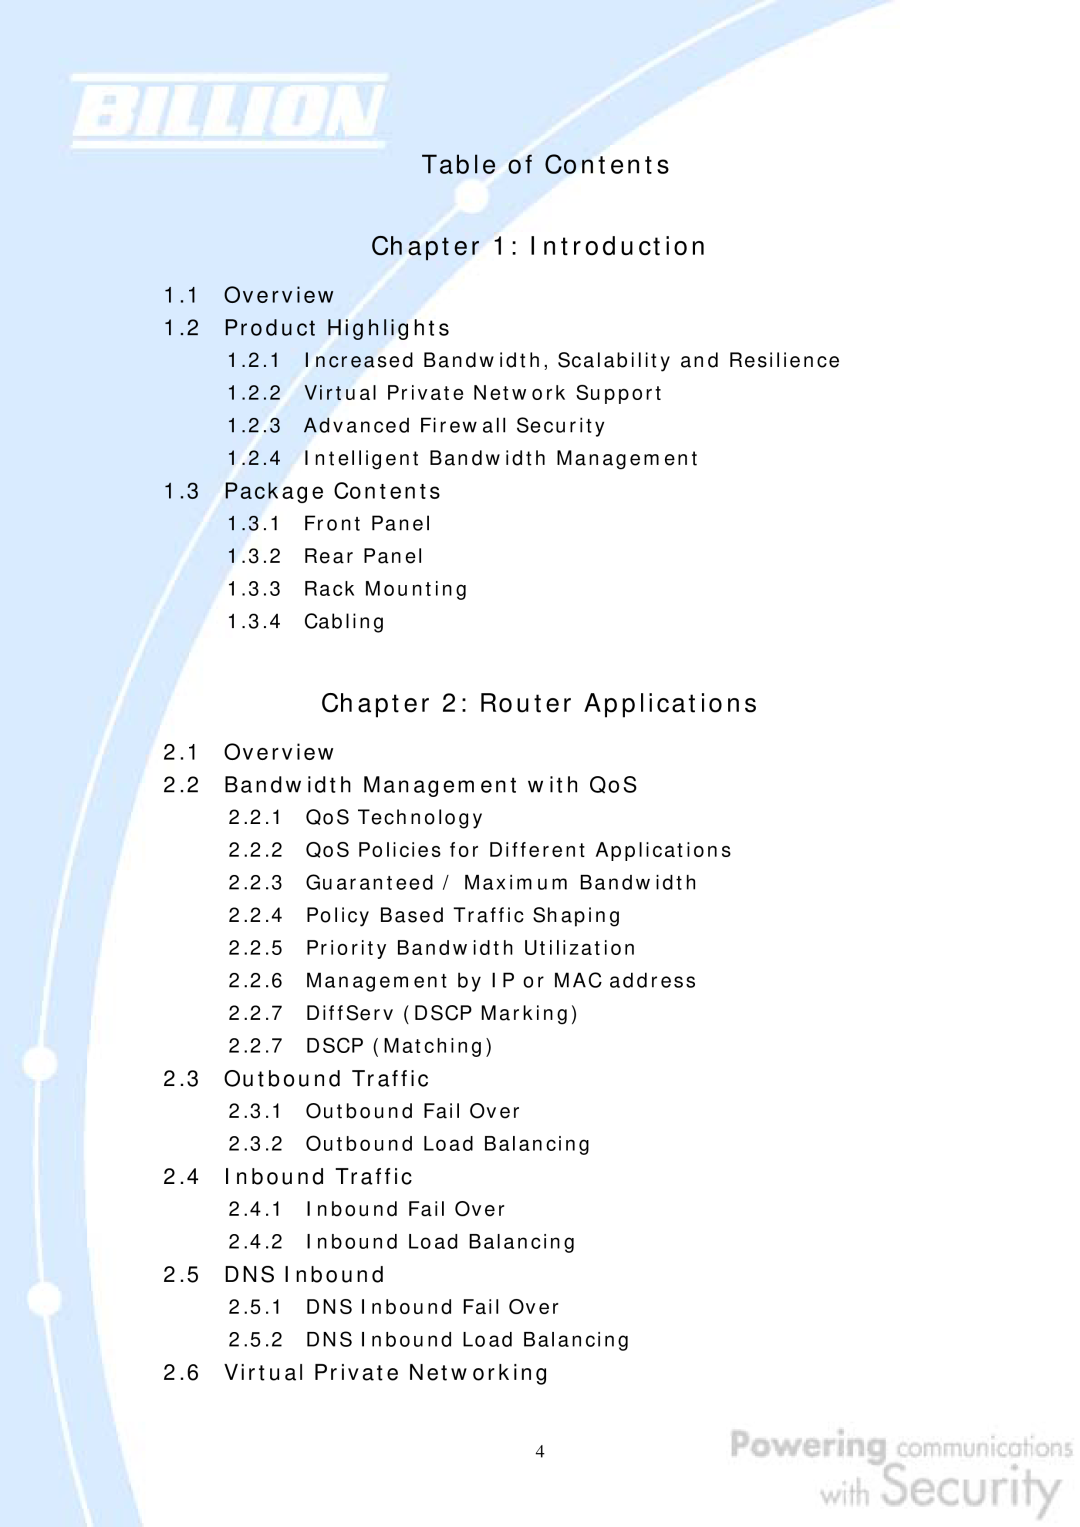 Billion Electric Company 30 Table of Contents Introduction, Router Applications, Overview 1.2 Product Highlights 